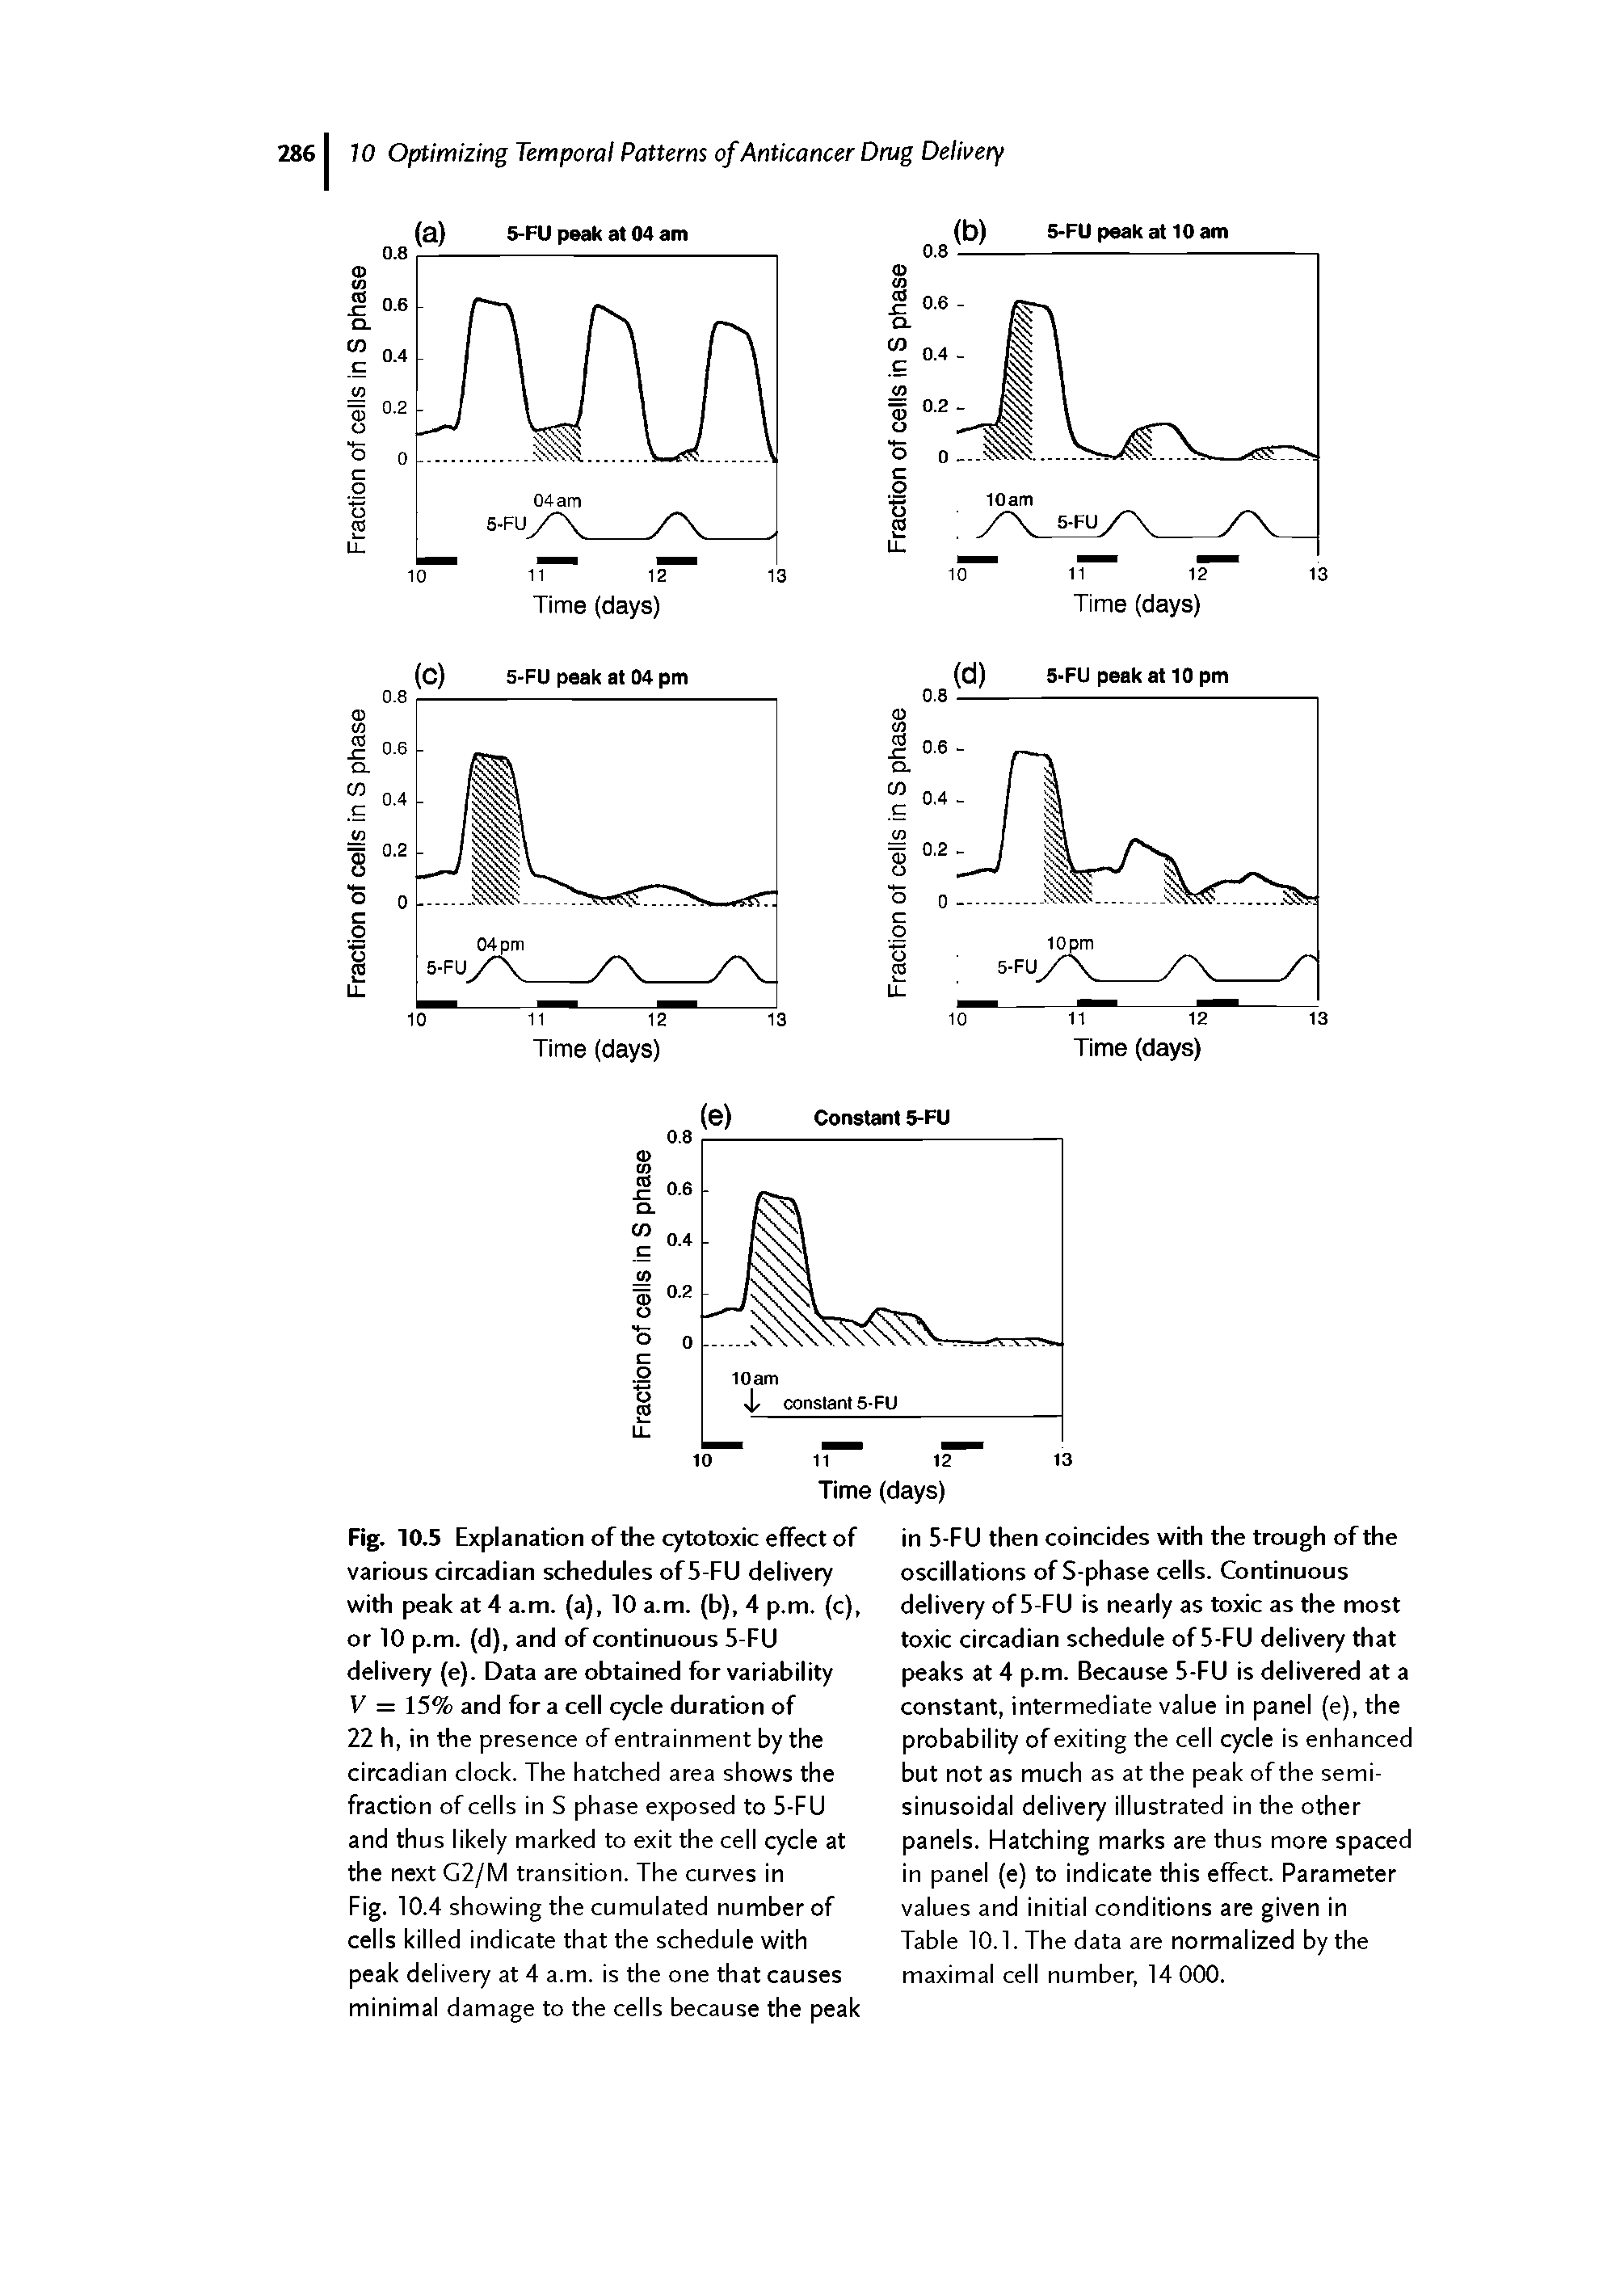 Fig. 10.5 Explanation of the cytotoxic effect of various circadian schedules of5-FU delivery with peak at 4 a.m. (a), 10 a.m. (b), 4 p.m. (c), or 10 p.m. (d), and of continuous 5-FU delivery (e). Data are obtained for variability V = 15% and for a cell cycle duration of 22 h, in the presence of entrainment by the circadian clock. The hatched area shows the fraction of cells in S phase exposed to 5-FU and thus likely marked to exit the cell cycle at the next G2/M transition. The curves in Fig. 10.4 showing the cumulated number of cells killed indicate that the schedule with peak delivery at 4 a.m. is the one that causes minimal damage to the cells because the peak...